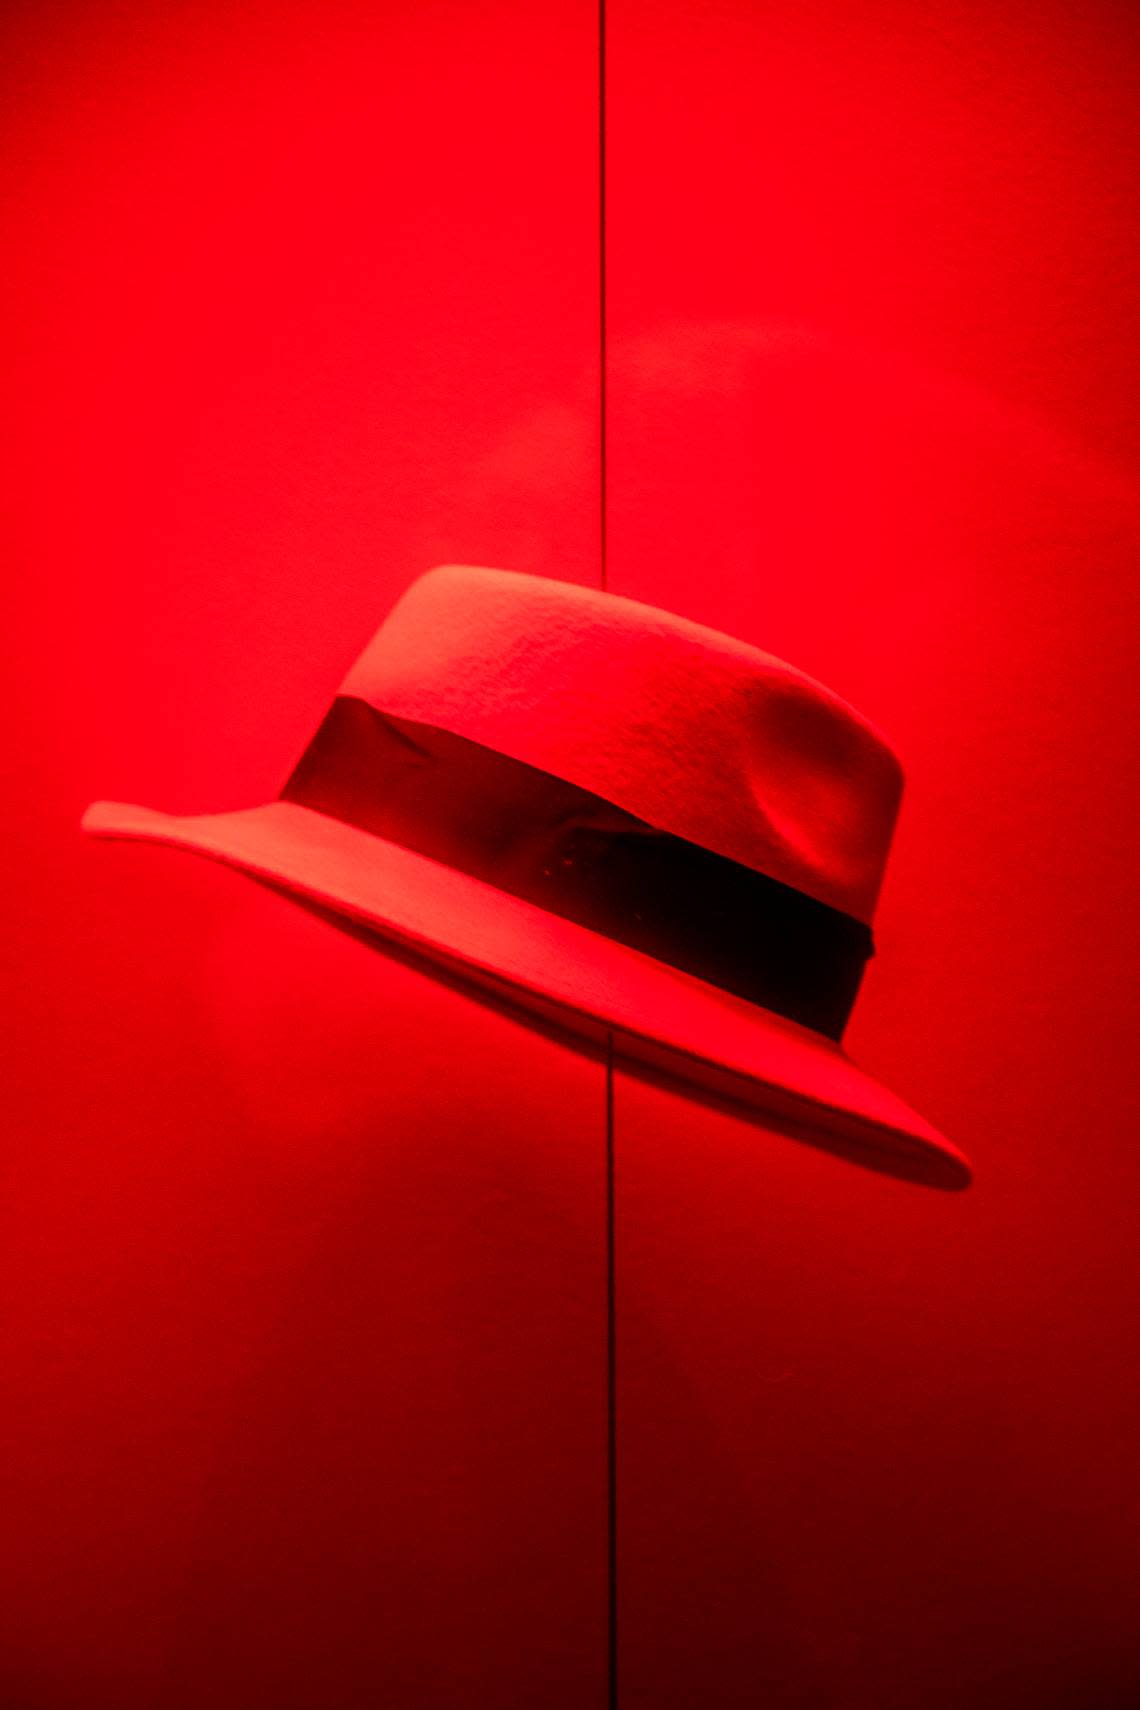 One of many red fedoras on display inside Red Hat’s office building in Raleigh.